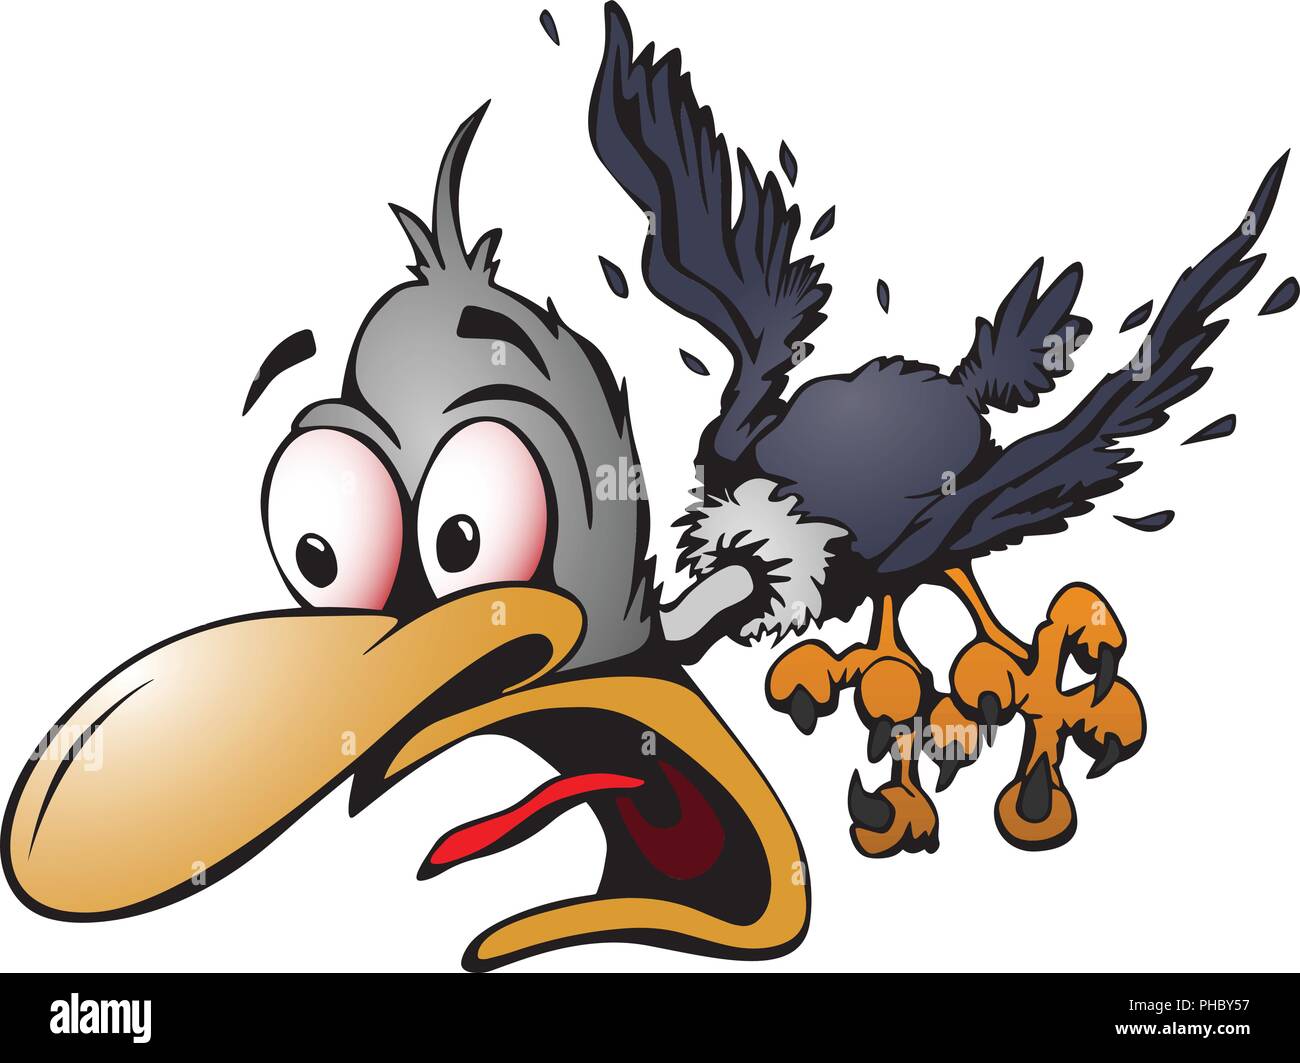 Crazy cartoon bird vector illustration with shocked expression, flying, loose feathers, big eyes, full color cartoon graphic Stock Vector